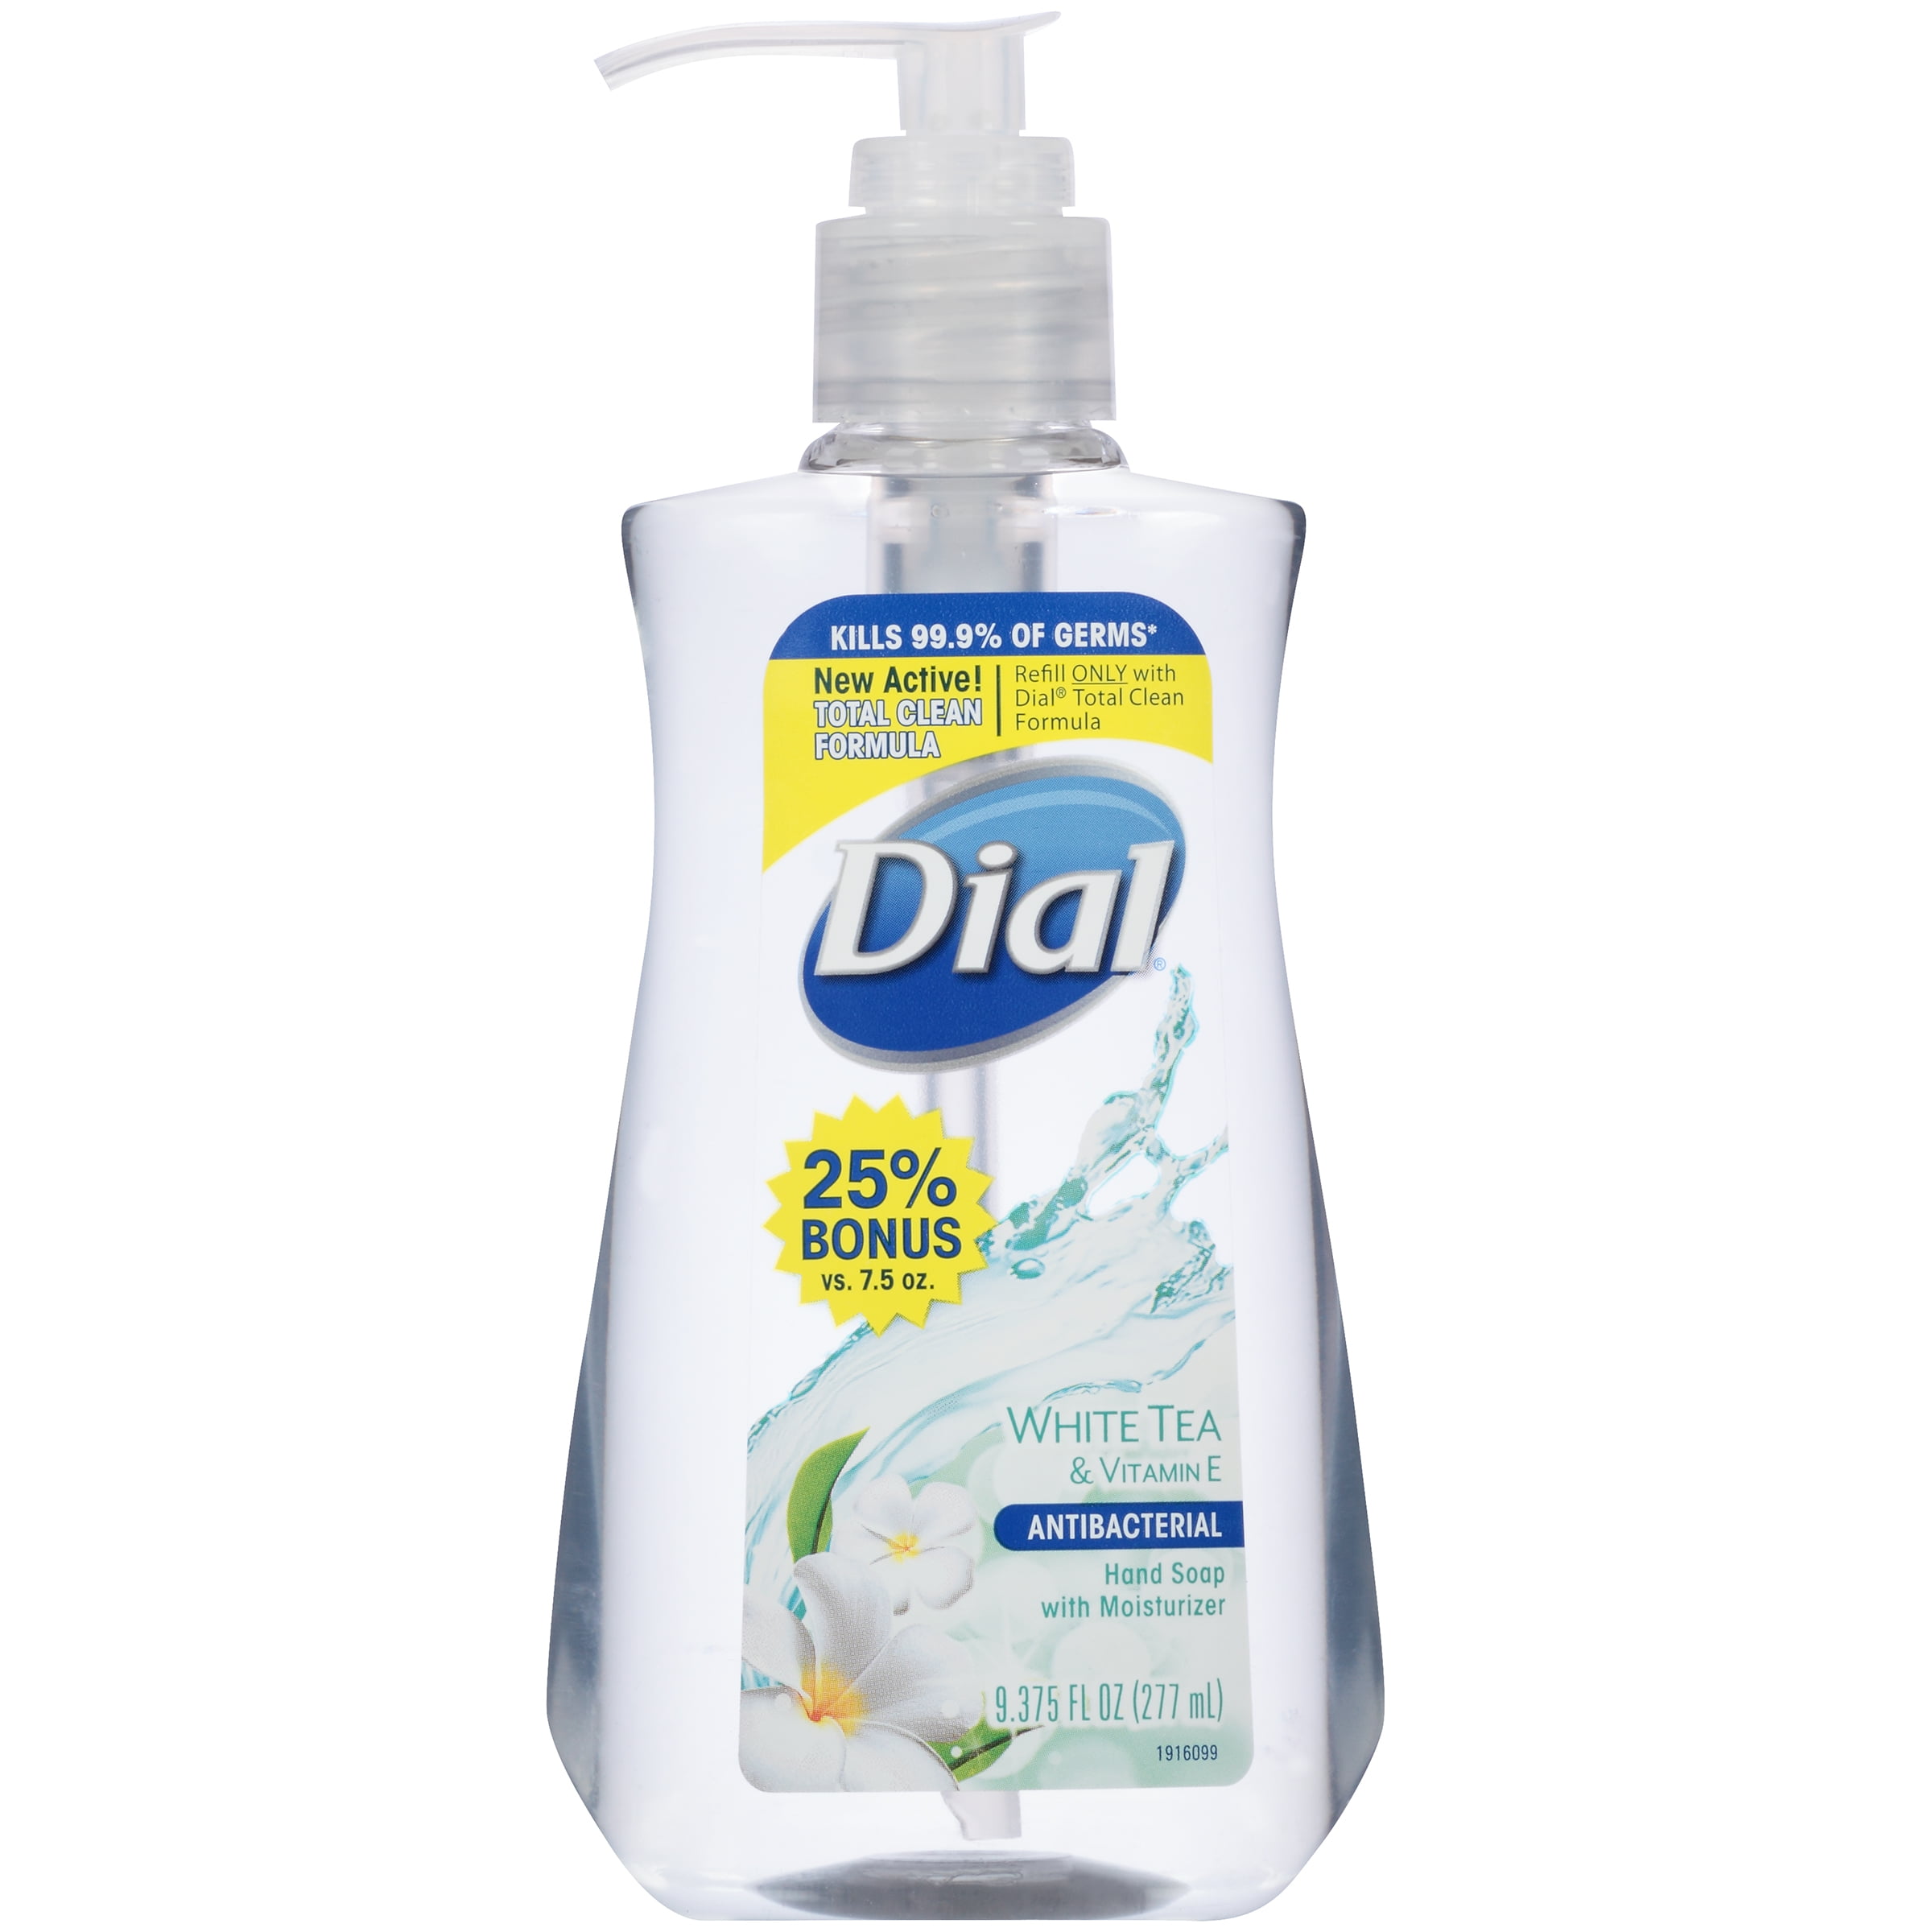 (4 Pack) Dial Antibacterial Liquid Hand Soap with Moisturizer, White